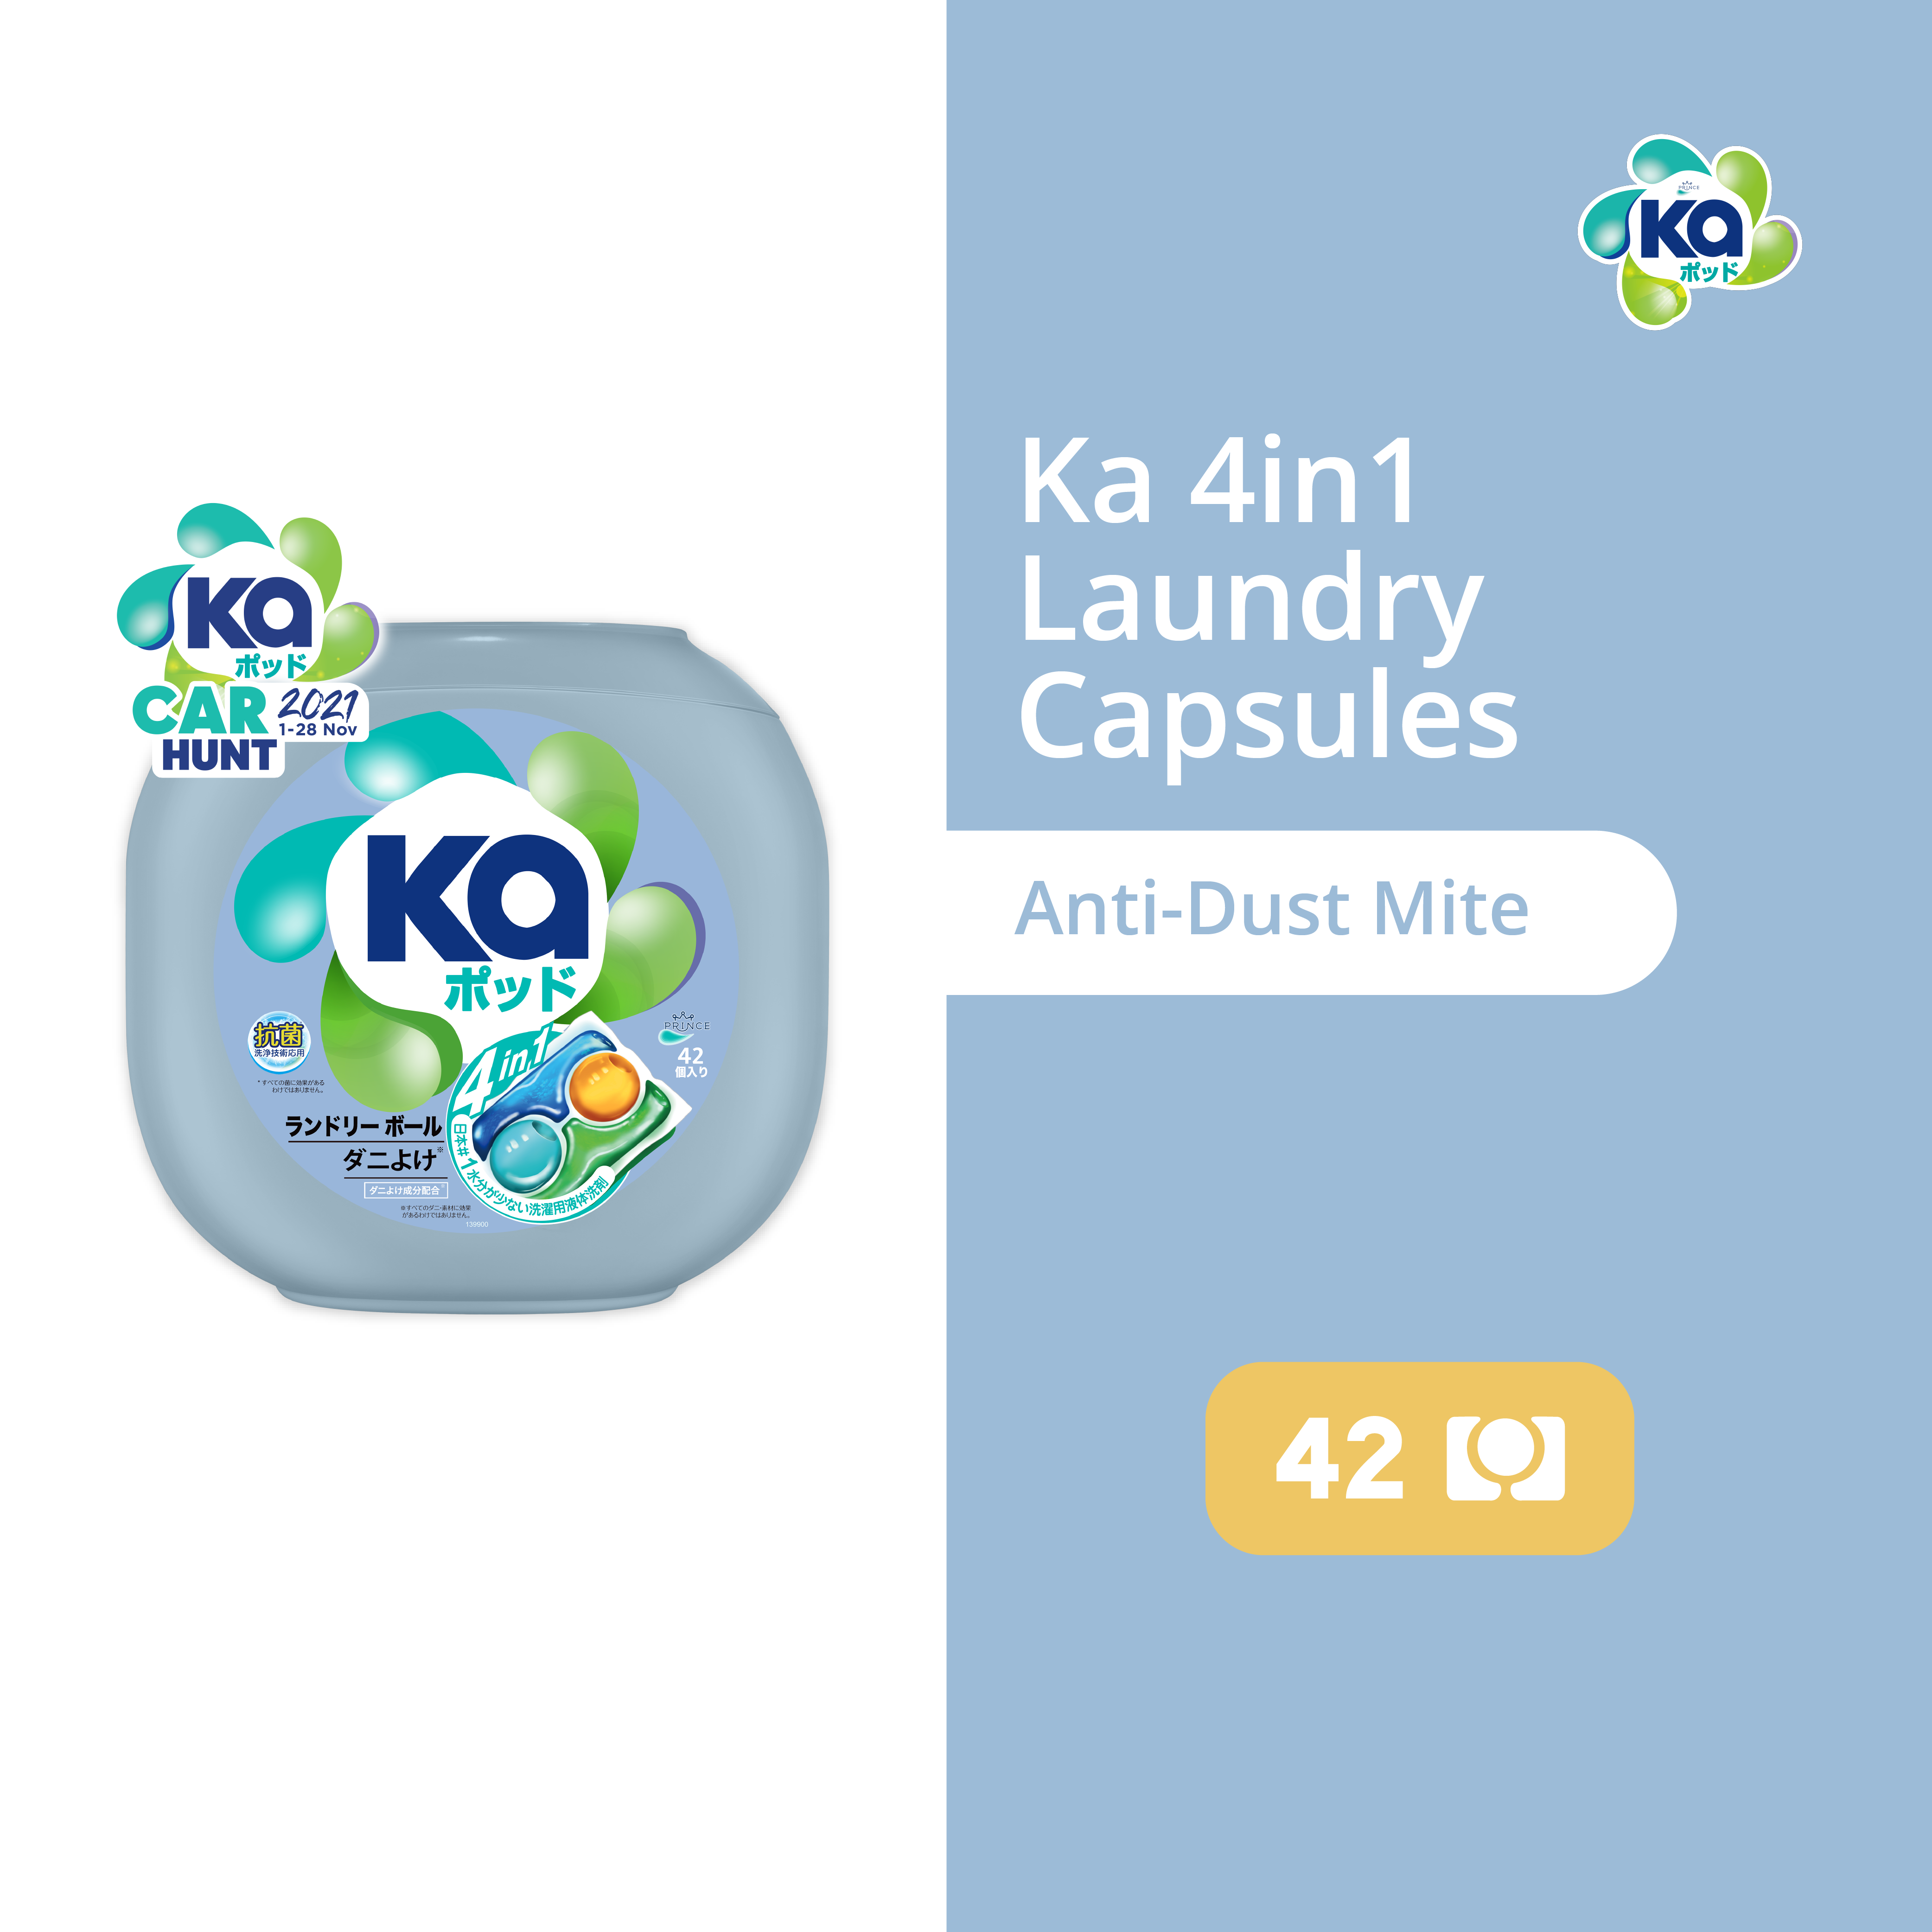 Ka 4in1 Laundry Capsules 42 Pods – Anti-Dust Mite